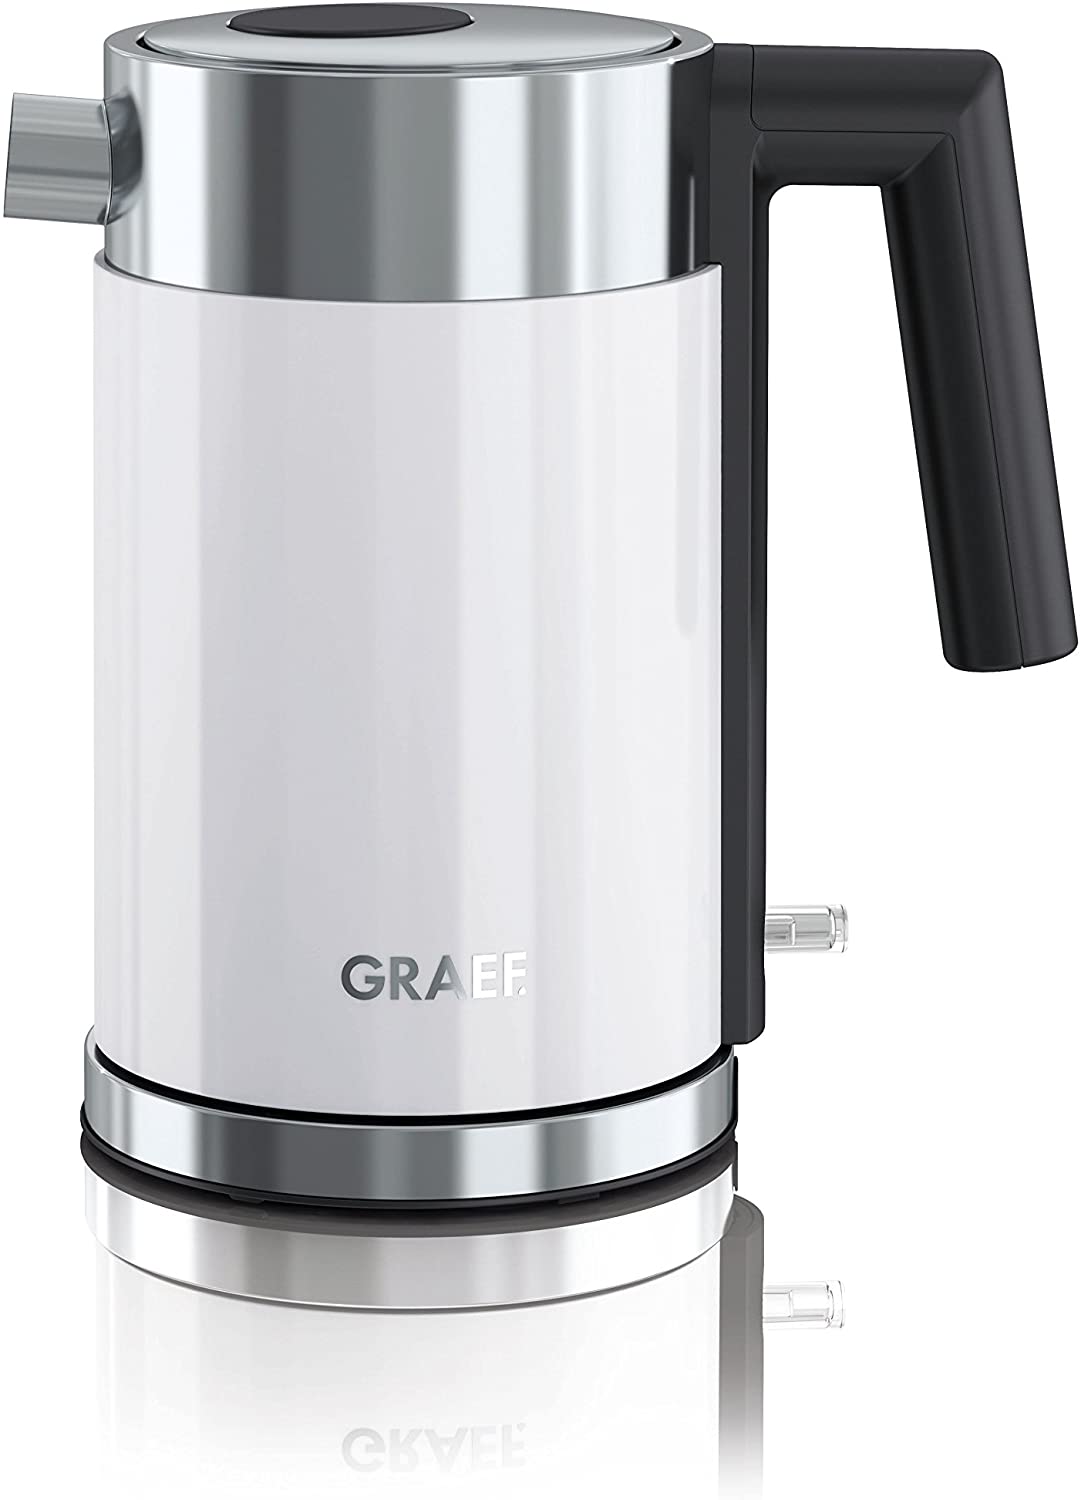 Graef WK 401 electrical kettle - electric kettles